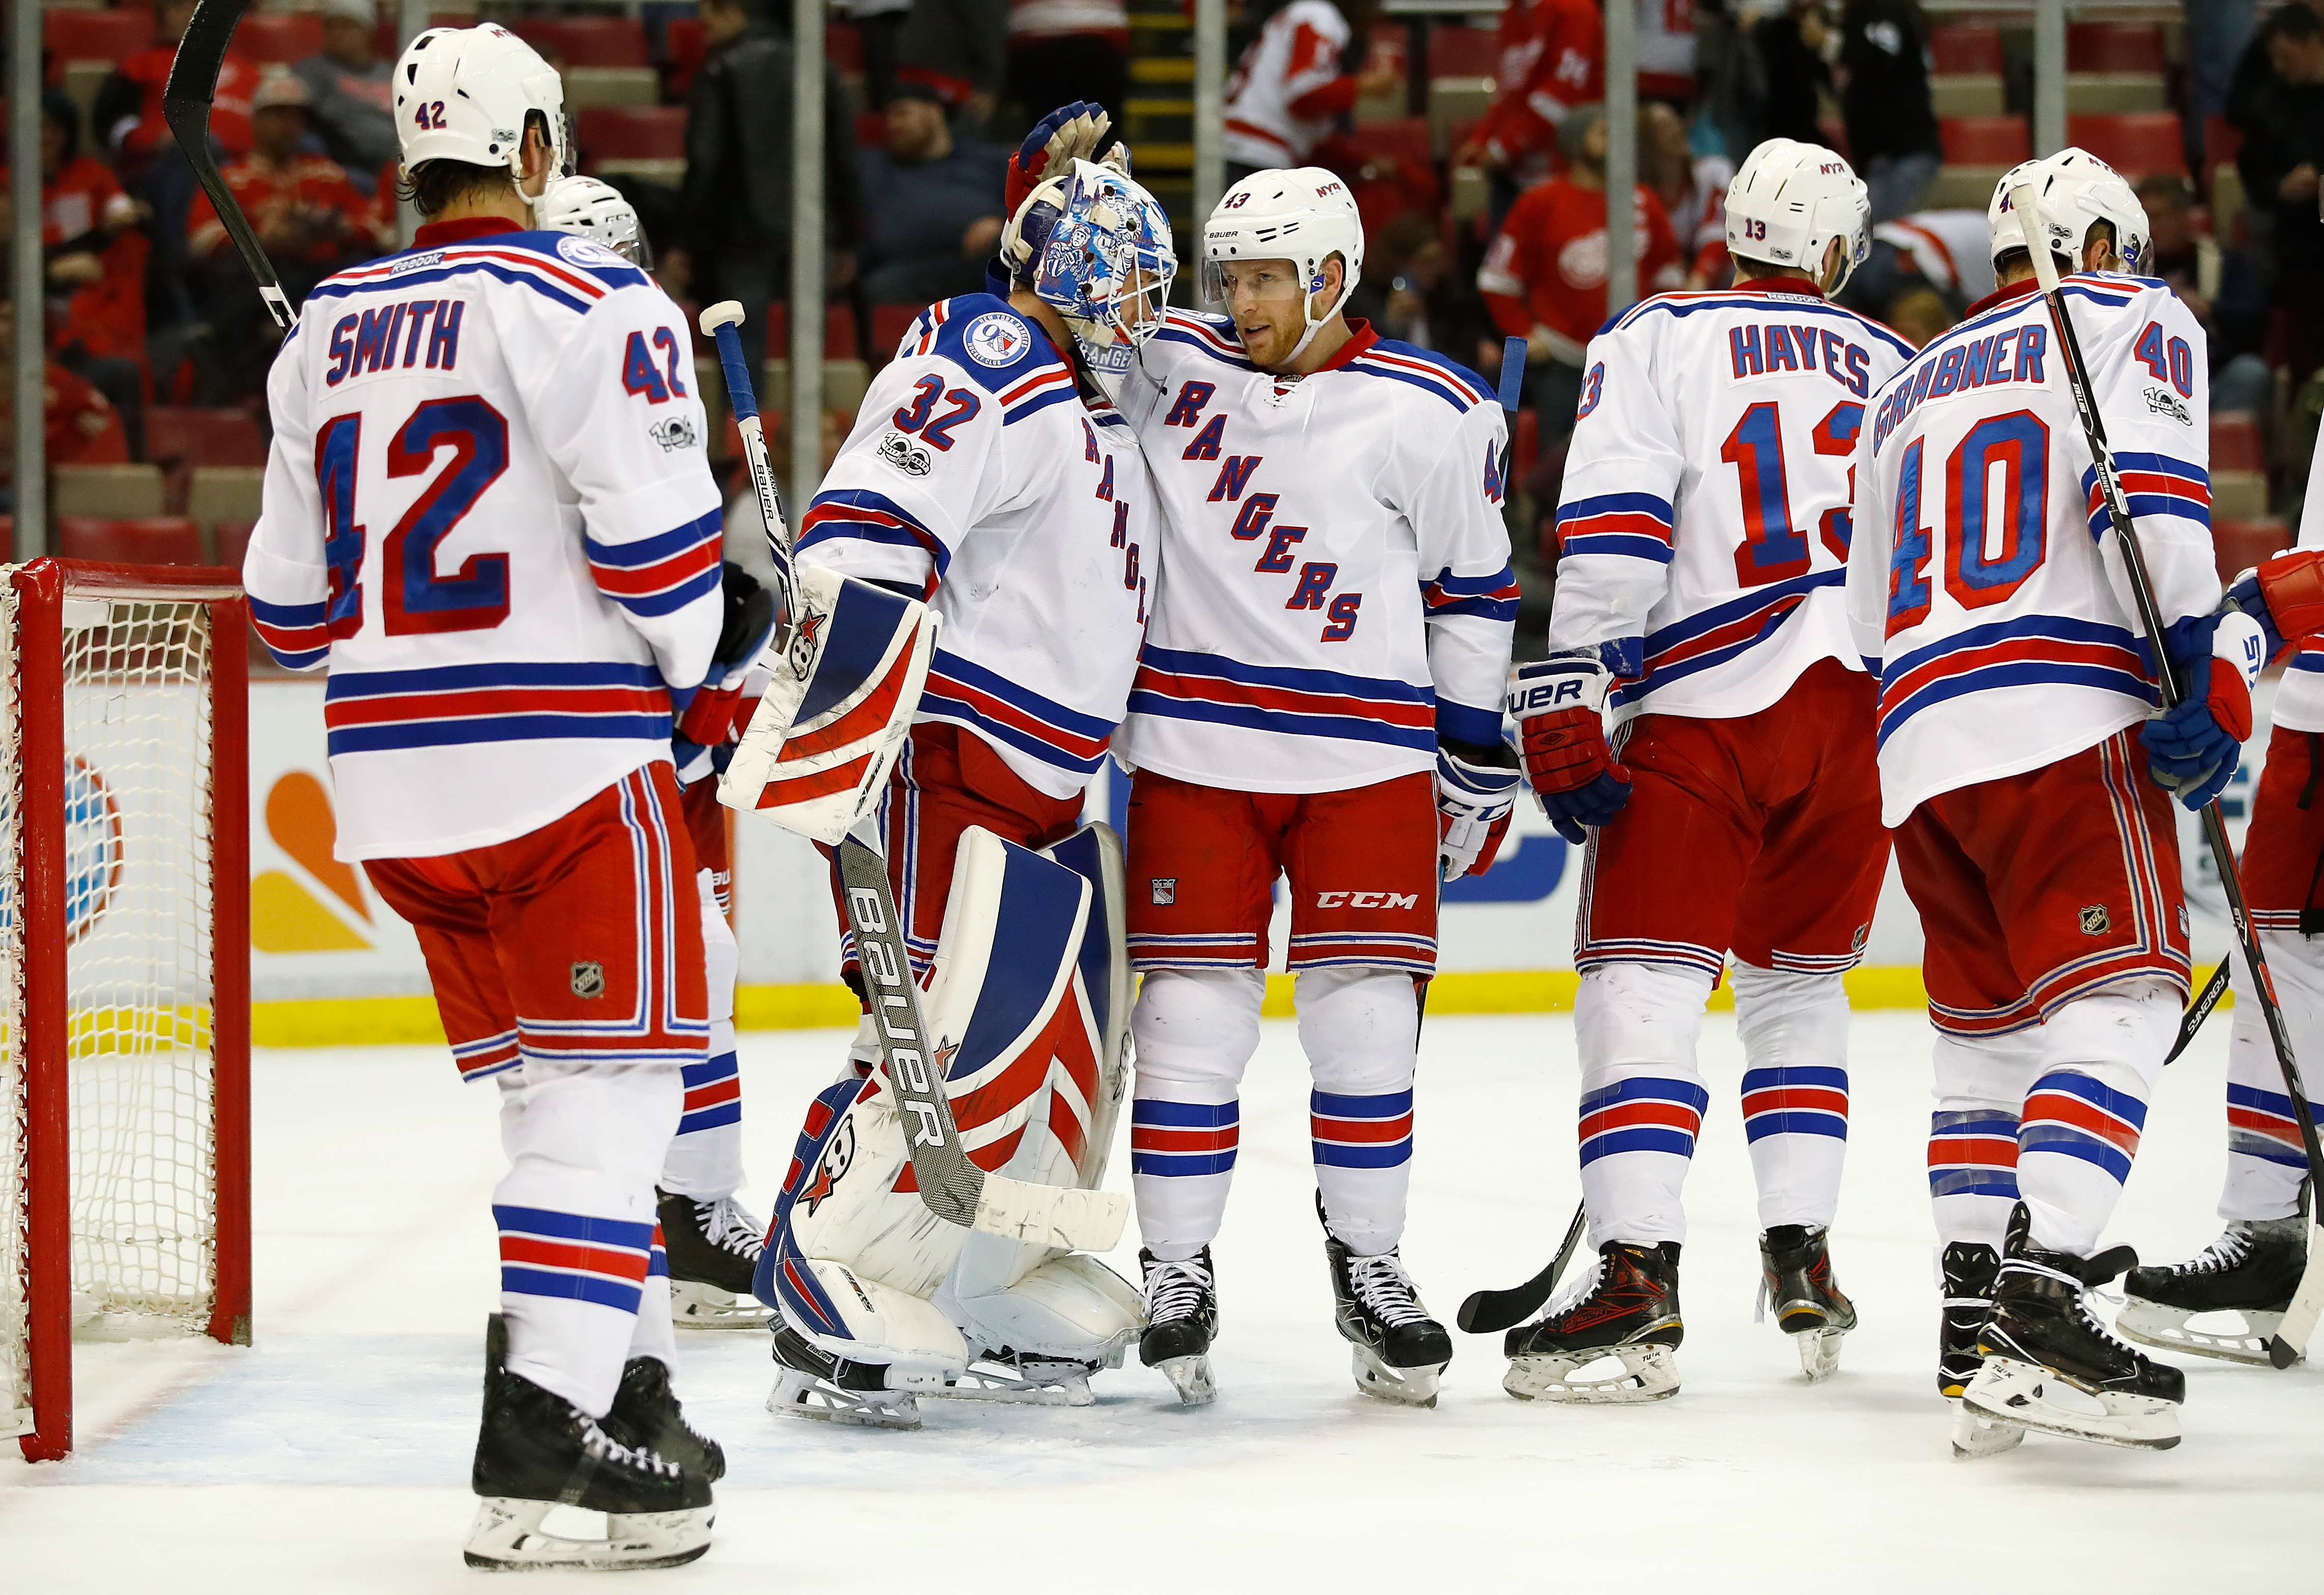 DETROIT, MI - MARCH 12: Antti Raanta #32 of the New York Rangers celebrate a 4-1 win over the Detroit Red Wings with Steven Kampfer #43 at Joe Louis Arena on March 12, 2017 in Detroit, Michigan. (Photo by Gregory Shamus/Getty Images)